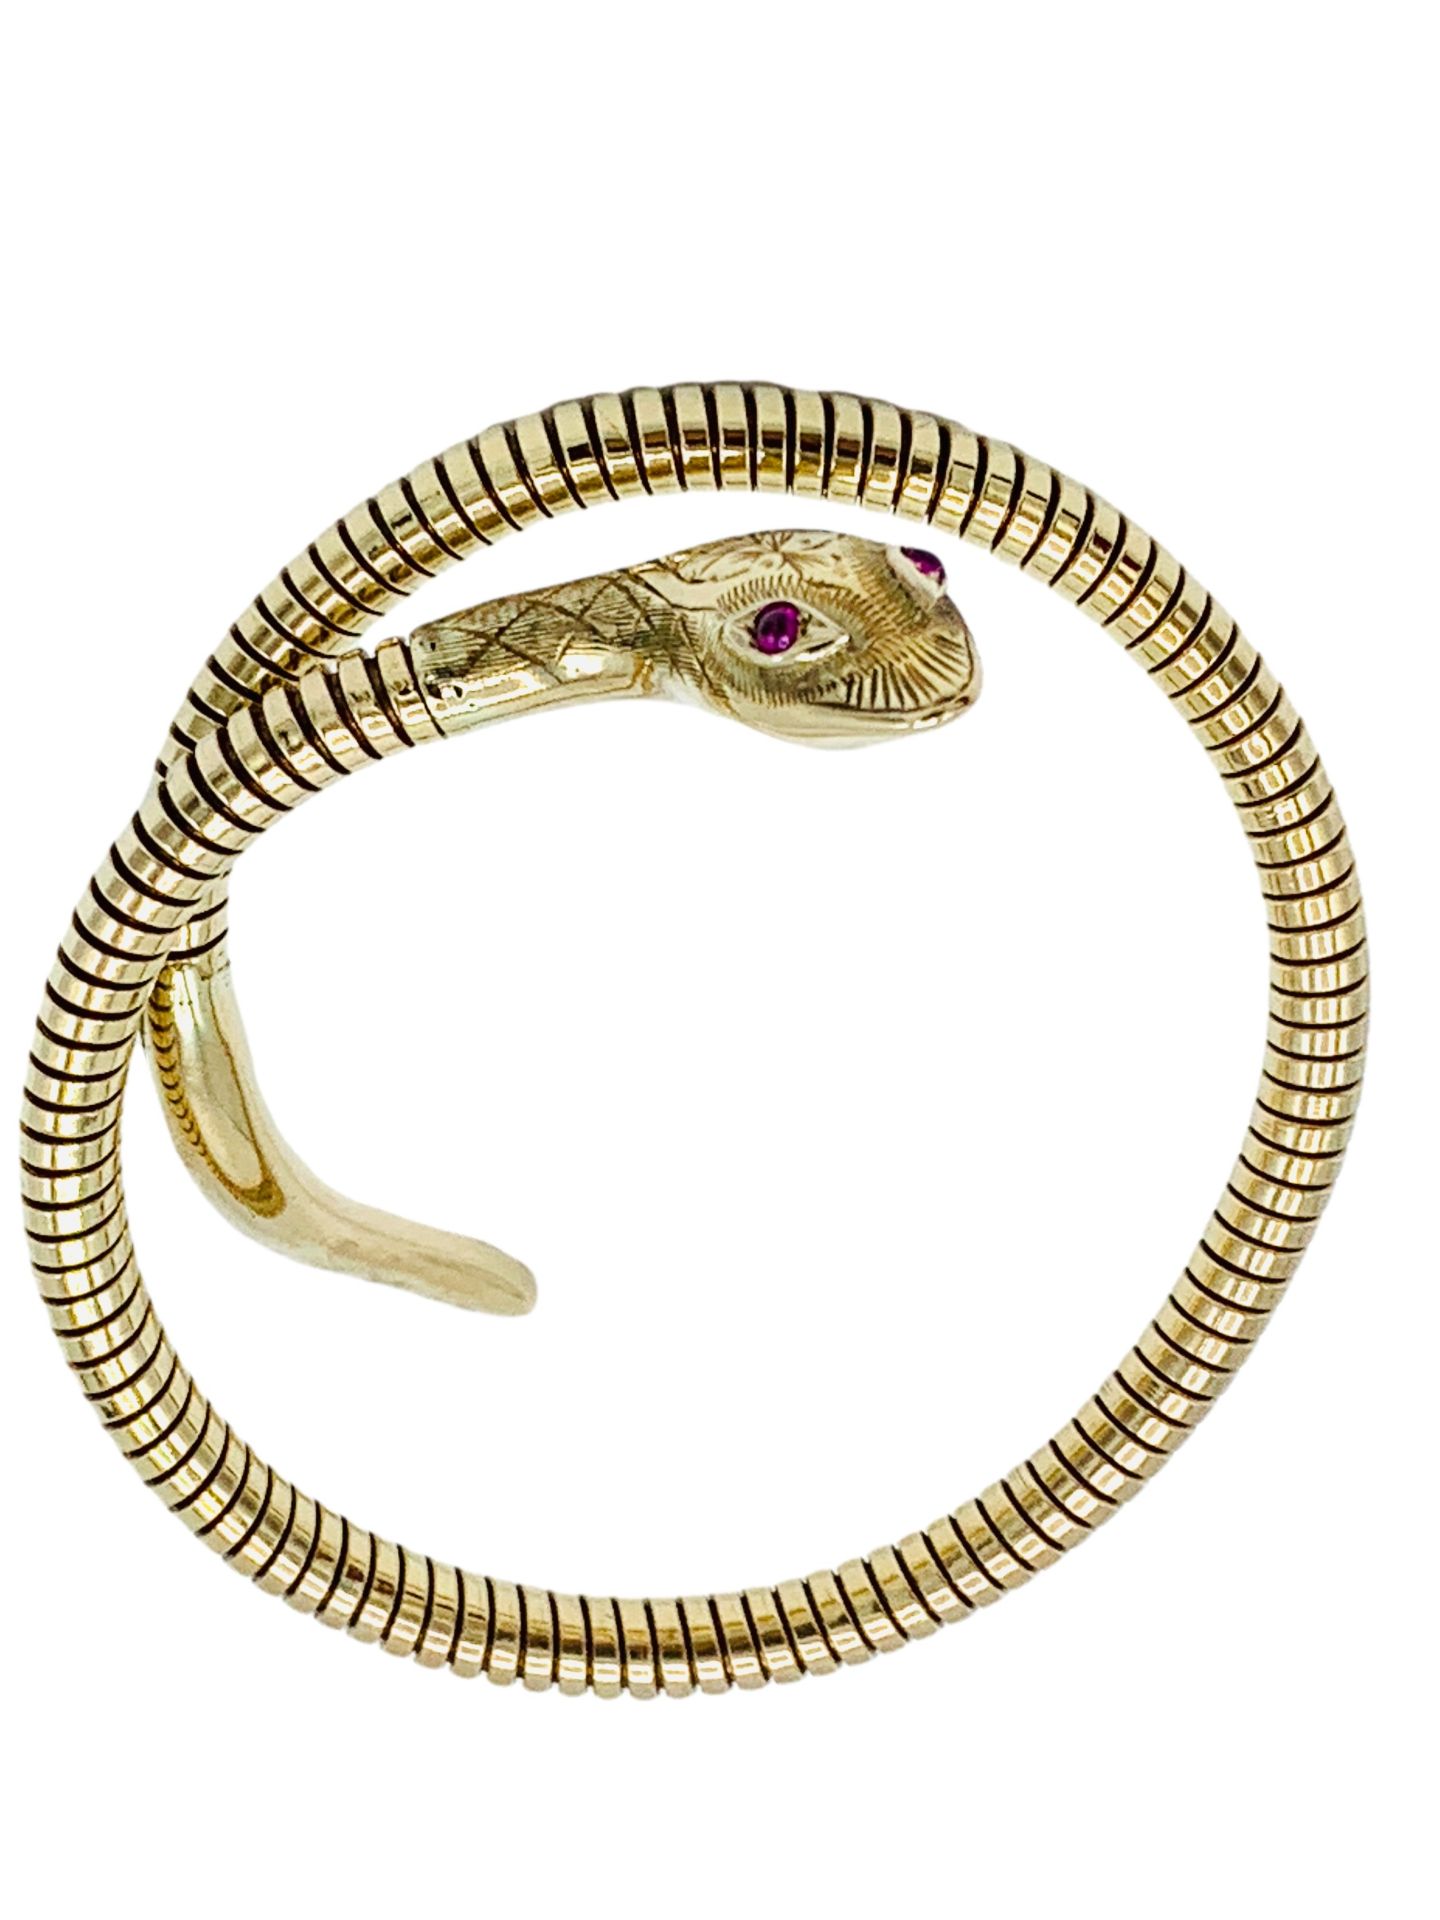 9ct gold snake bracelet with red stone eyes.